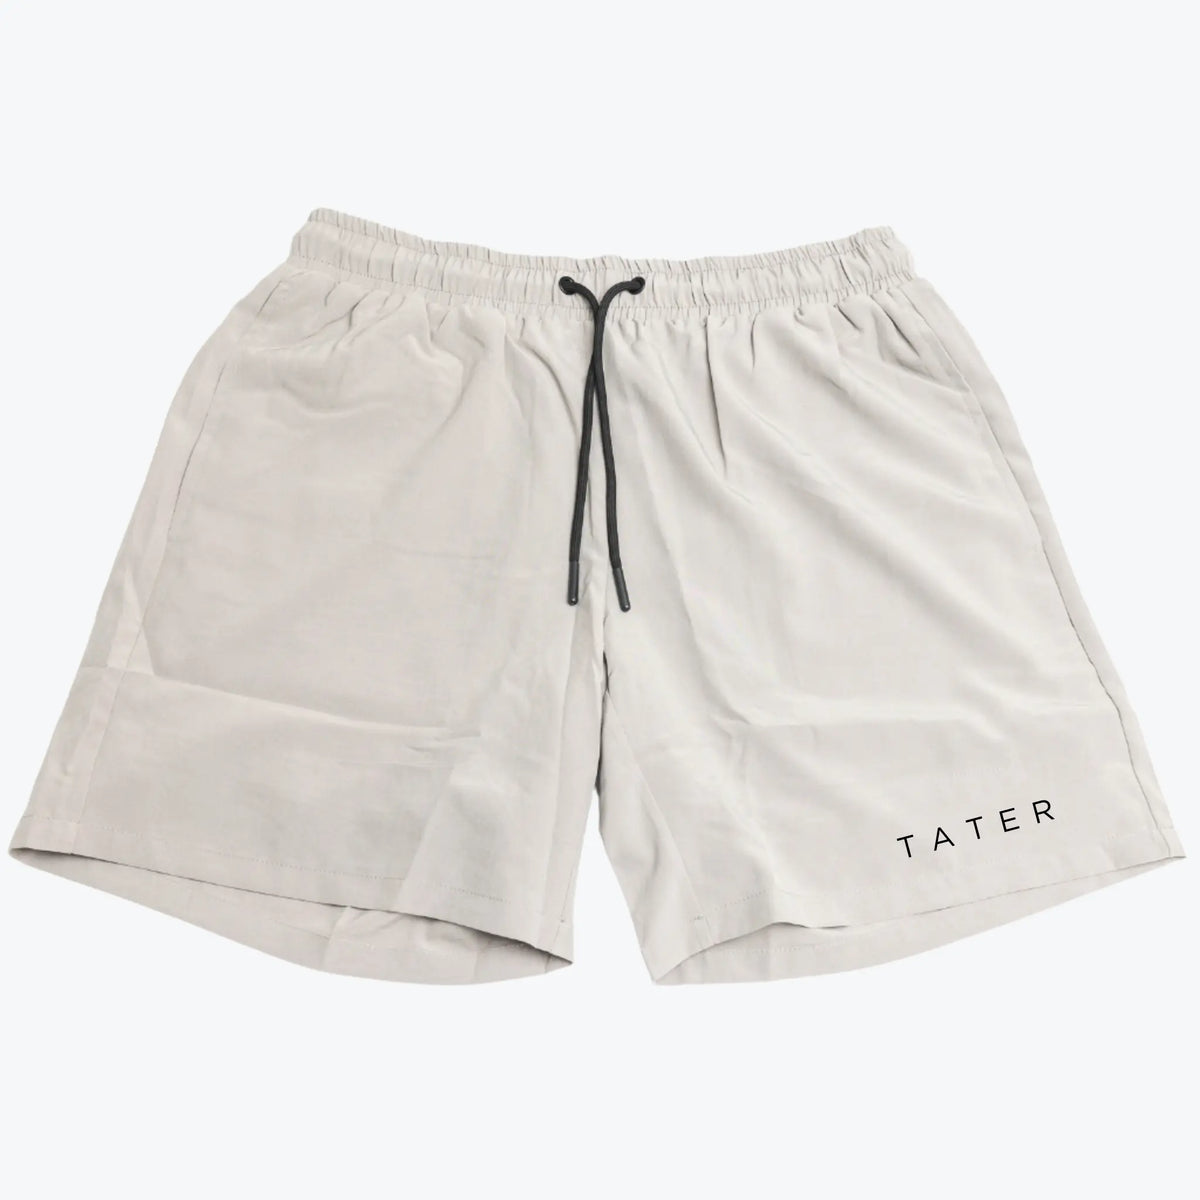 The image features a pair of light grey athletic shorts with a drawstring at the waist. On one leg, the word &quot;TATER&quot; is printed in black, which is the branding of the product. The shorts appear to be designed for physical activity, such as working out or sports practice, given the comfortable and breathable design. The color and minimal branding suggest a versatile piece of athletic wear that could be easily coordinated with other workout gear.